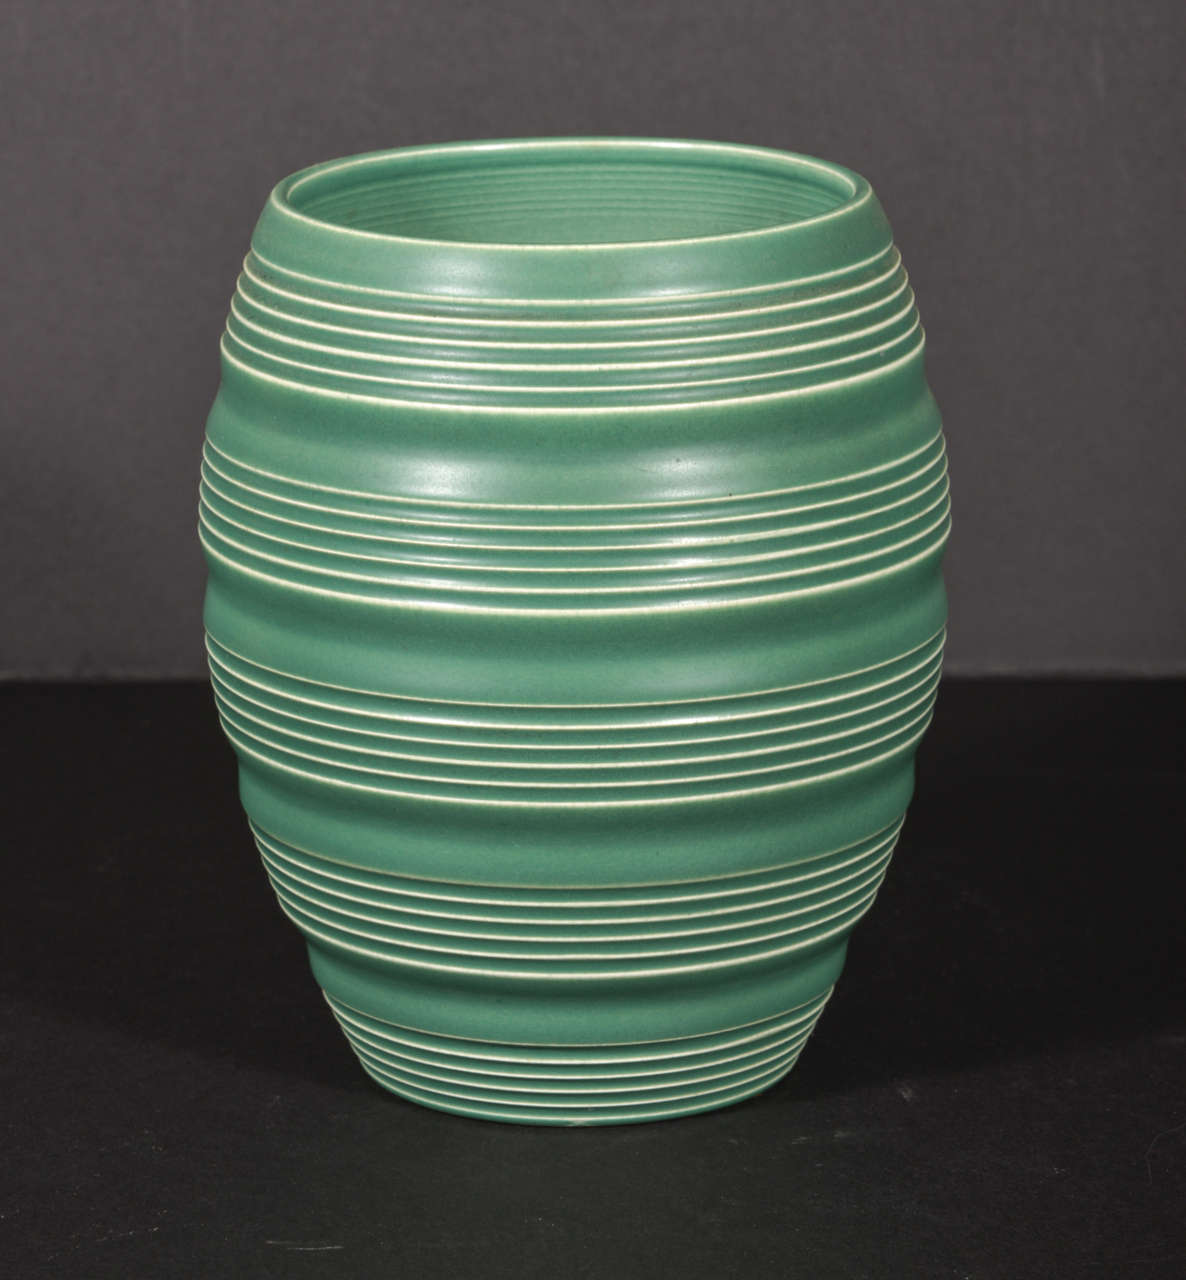 Art Deco Keith Murray for Wedgewood collection art deco vases